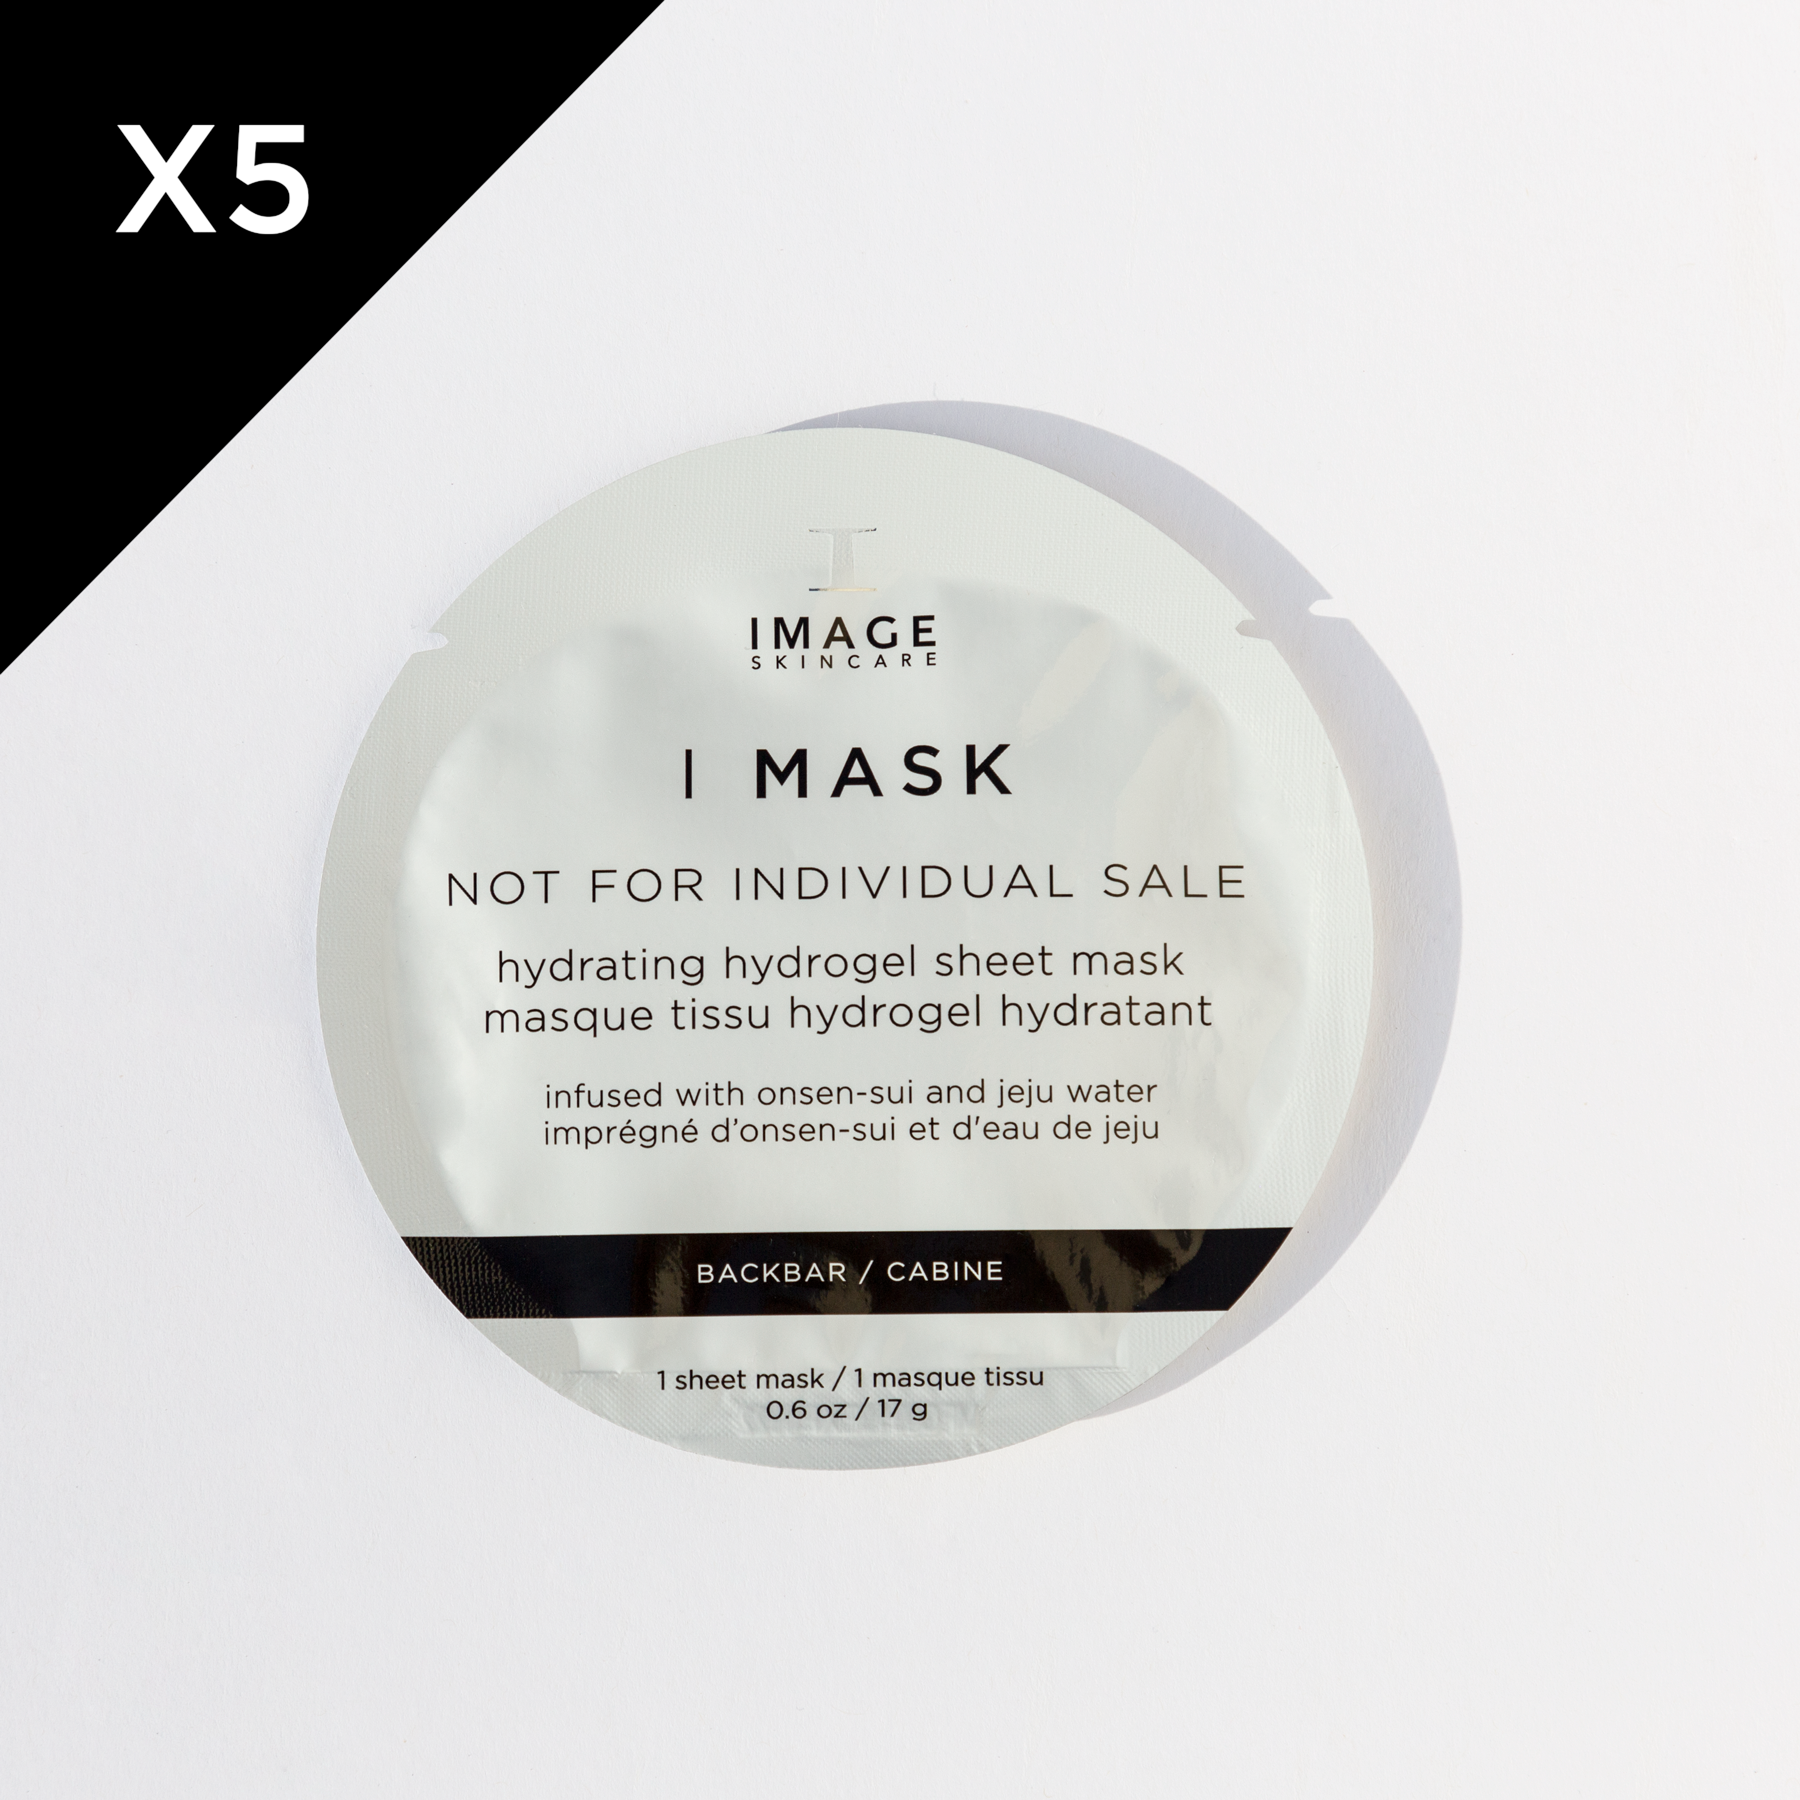 I MASK hydrating hydrogel sheet mask for the treatment room